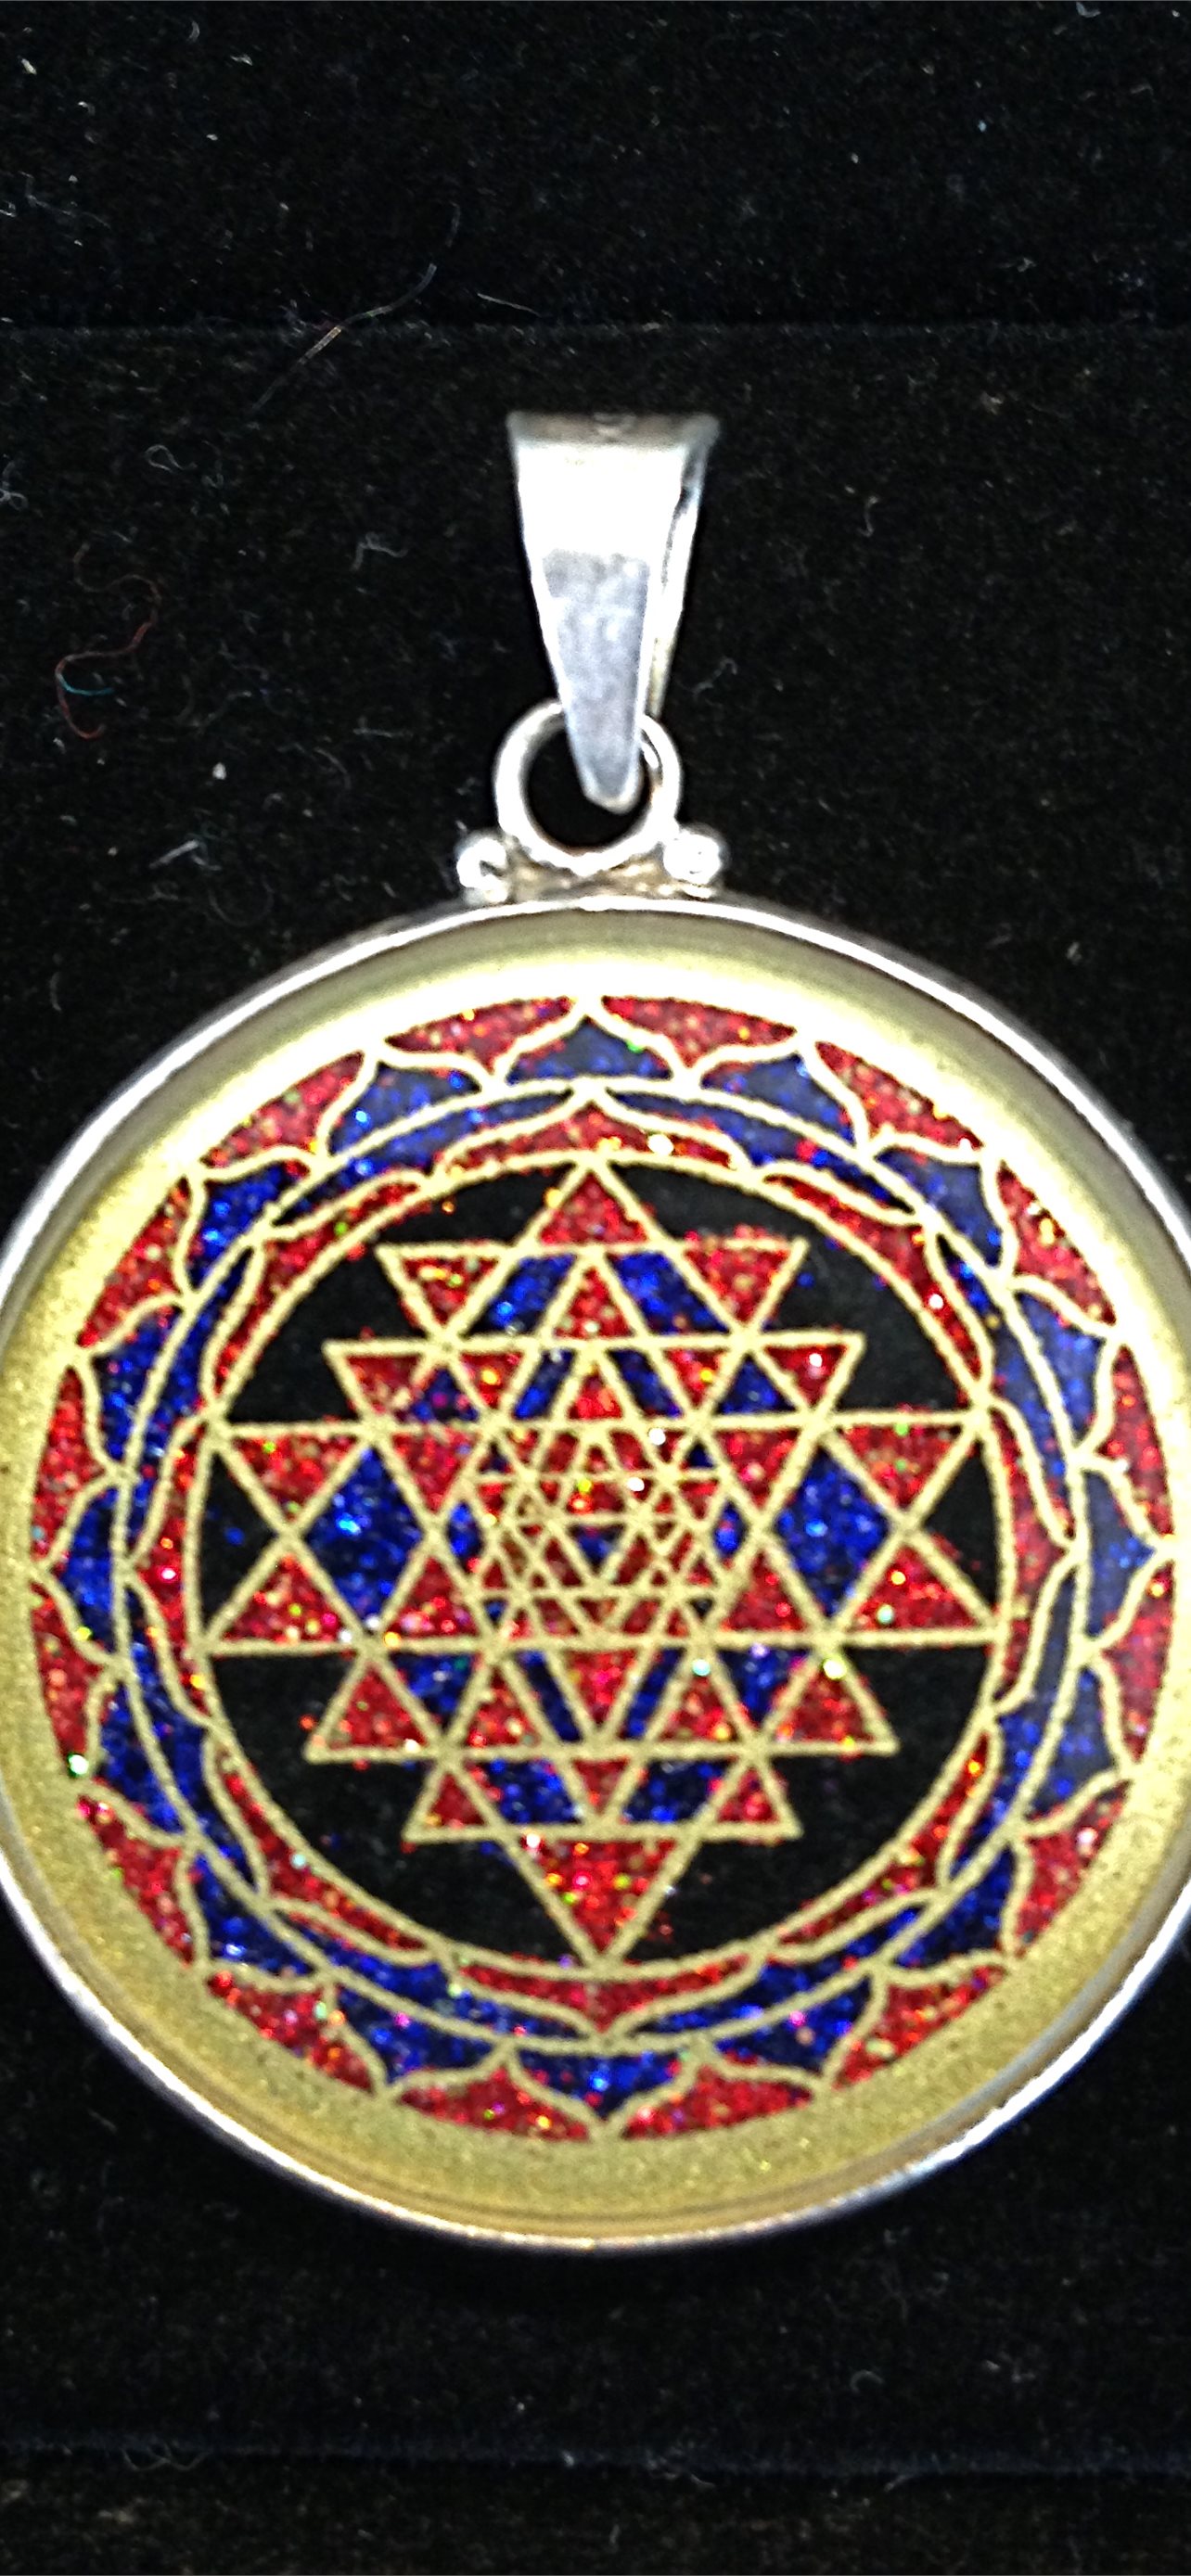 Best 52 Sri Yantra on Hip iPhone Wallpapers Free Download